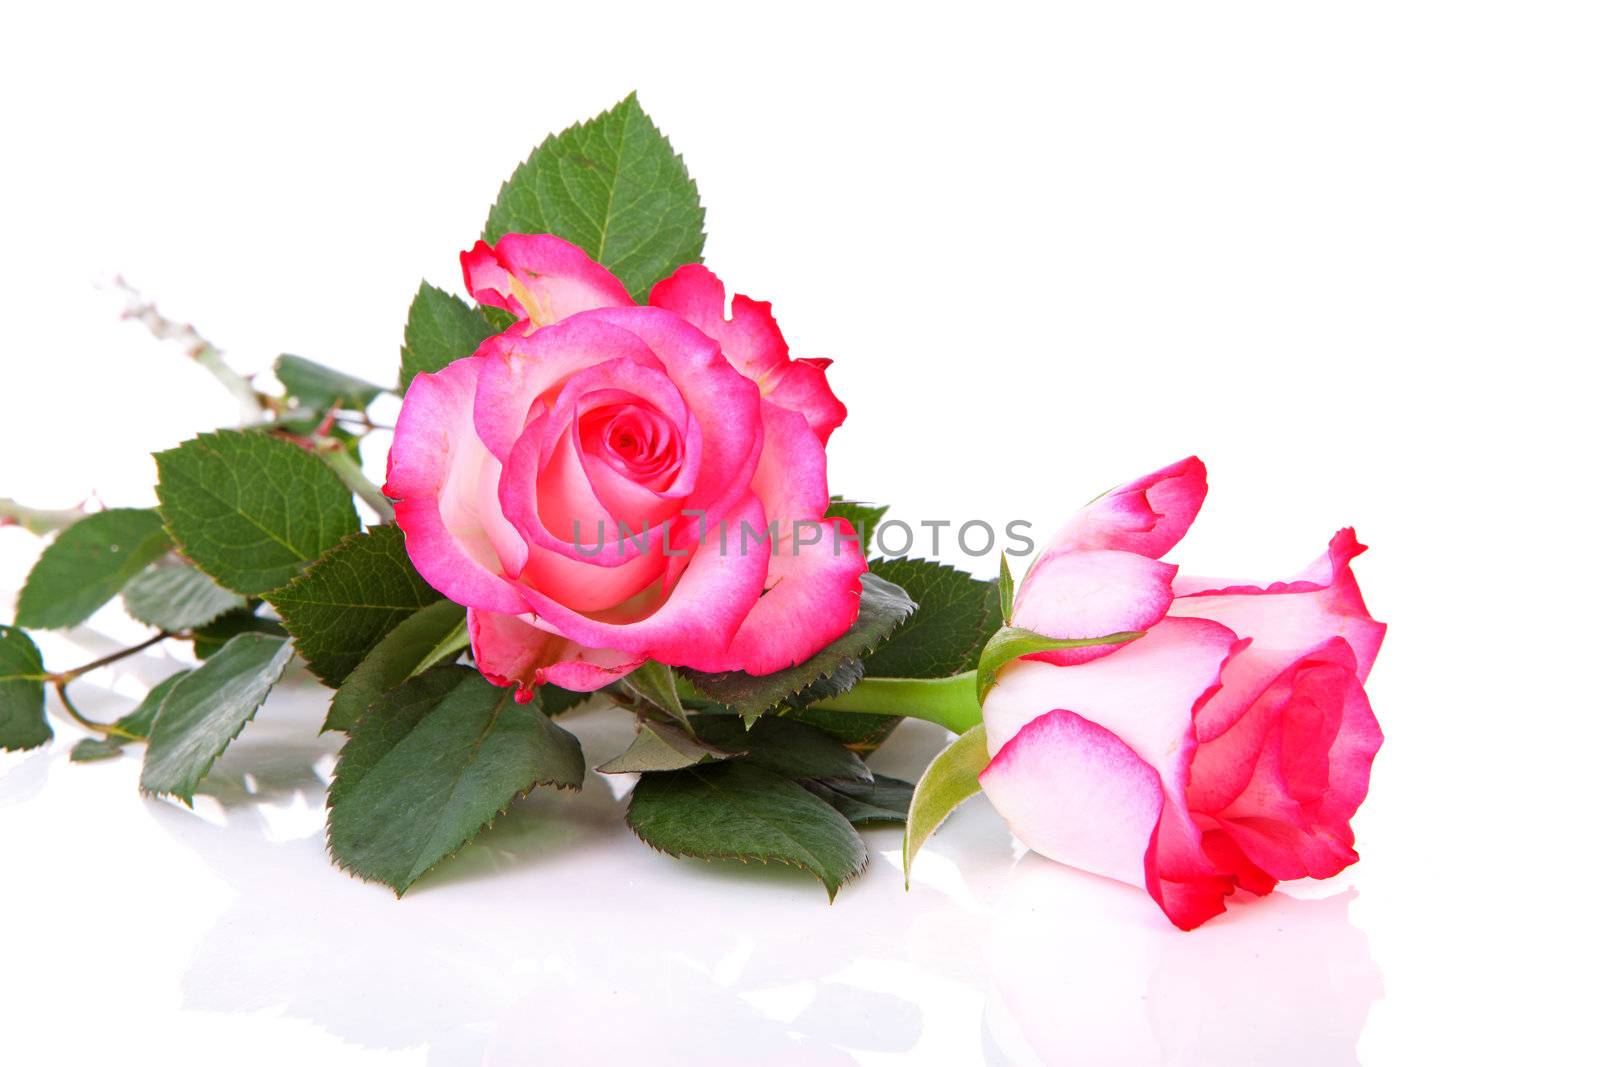 Two beautiful pink roses by sannie32